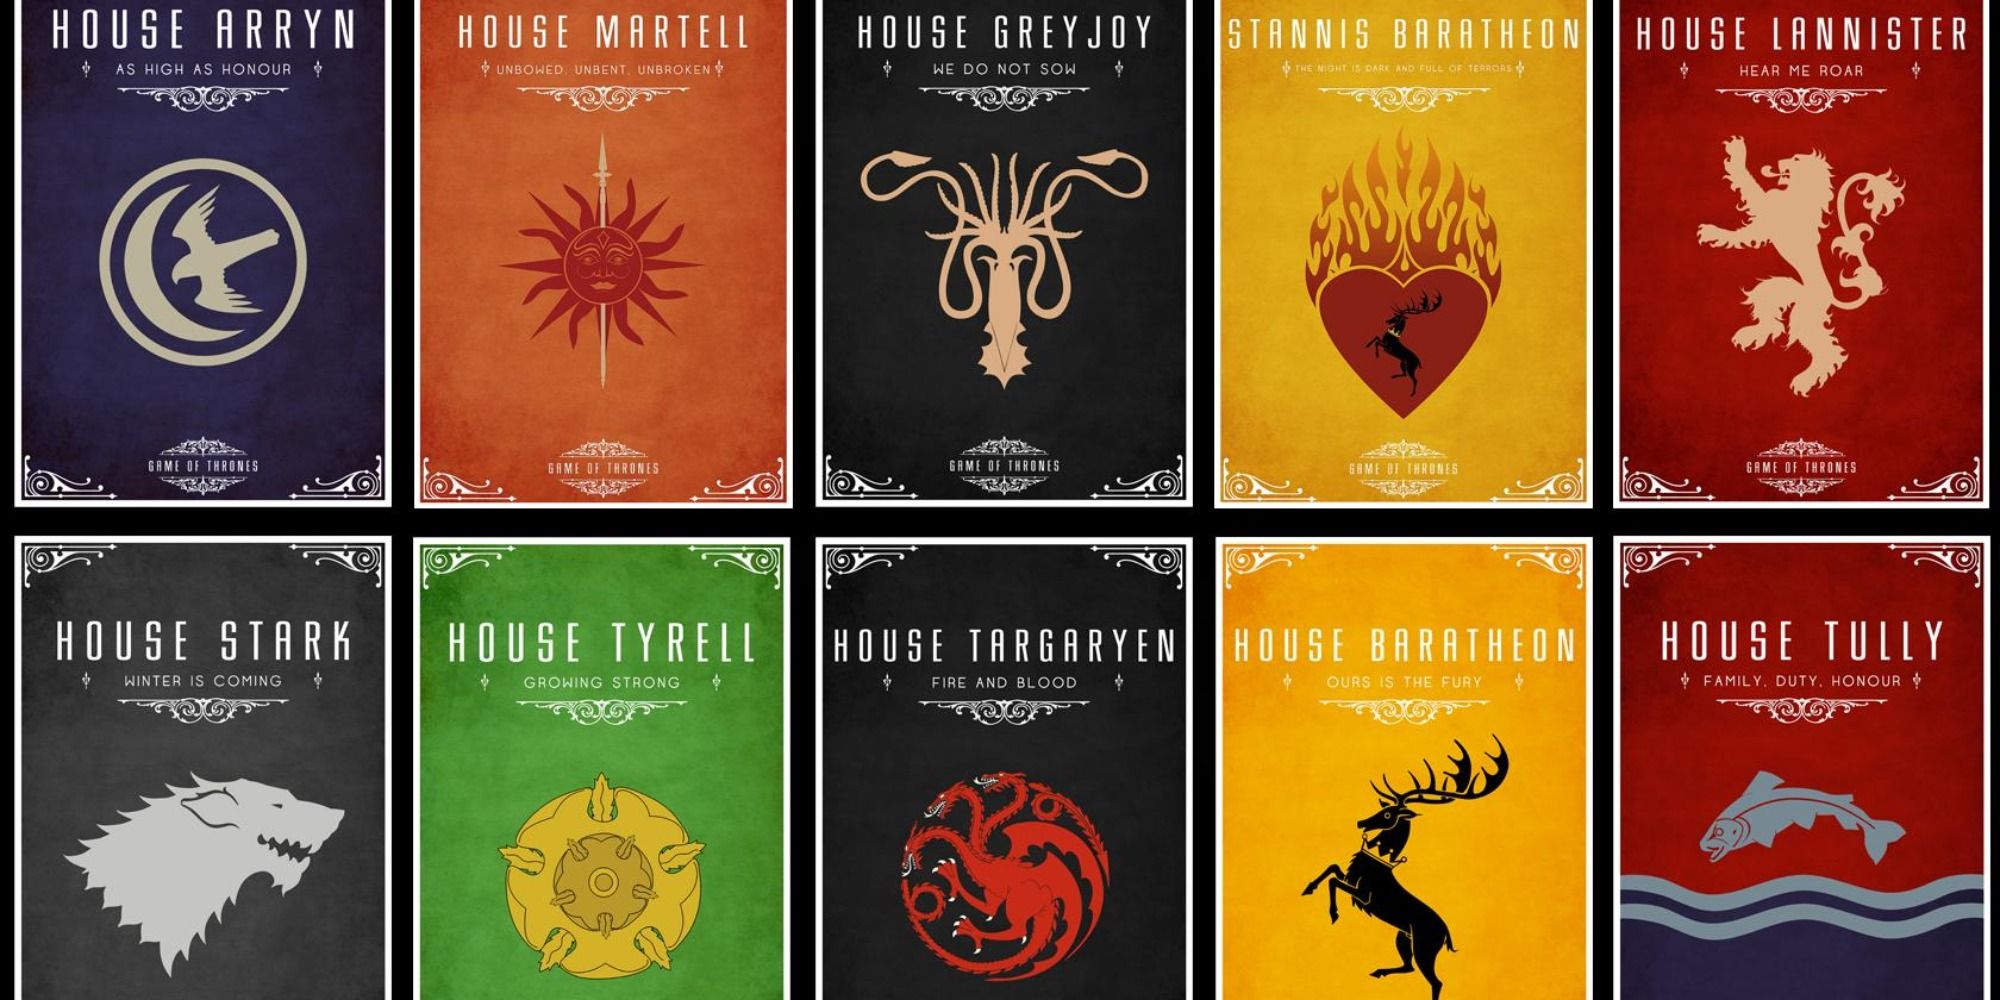 most powerful houses in westeros